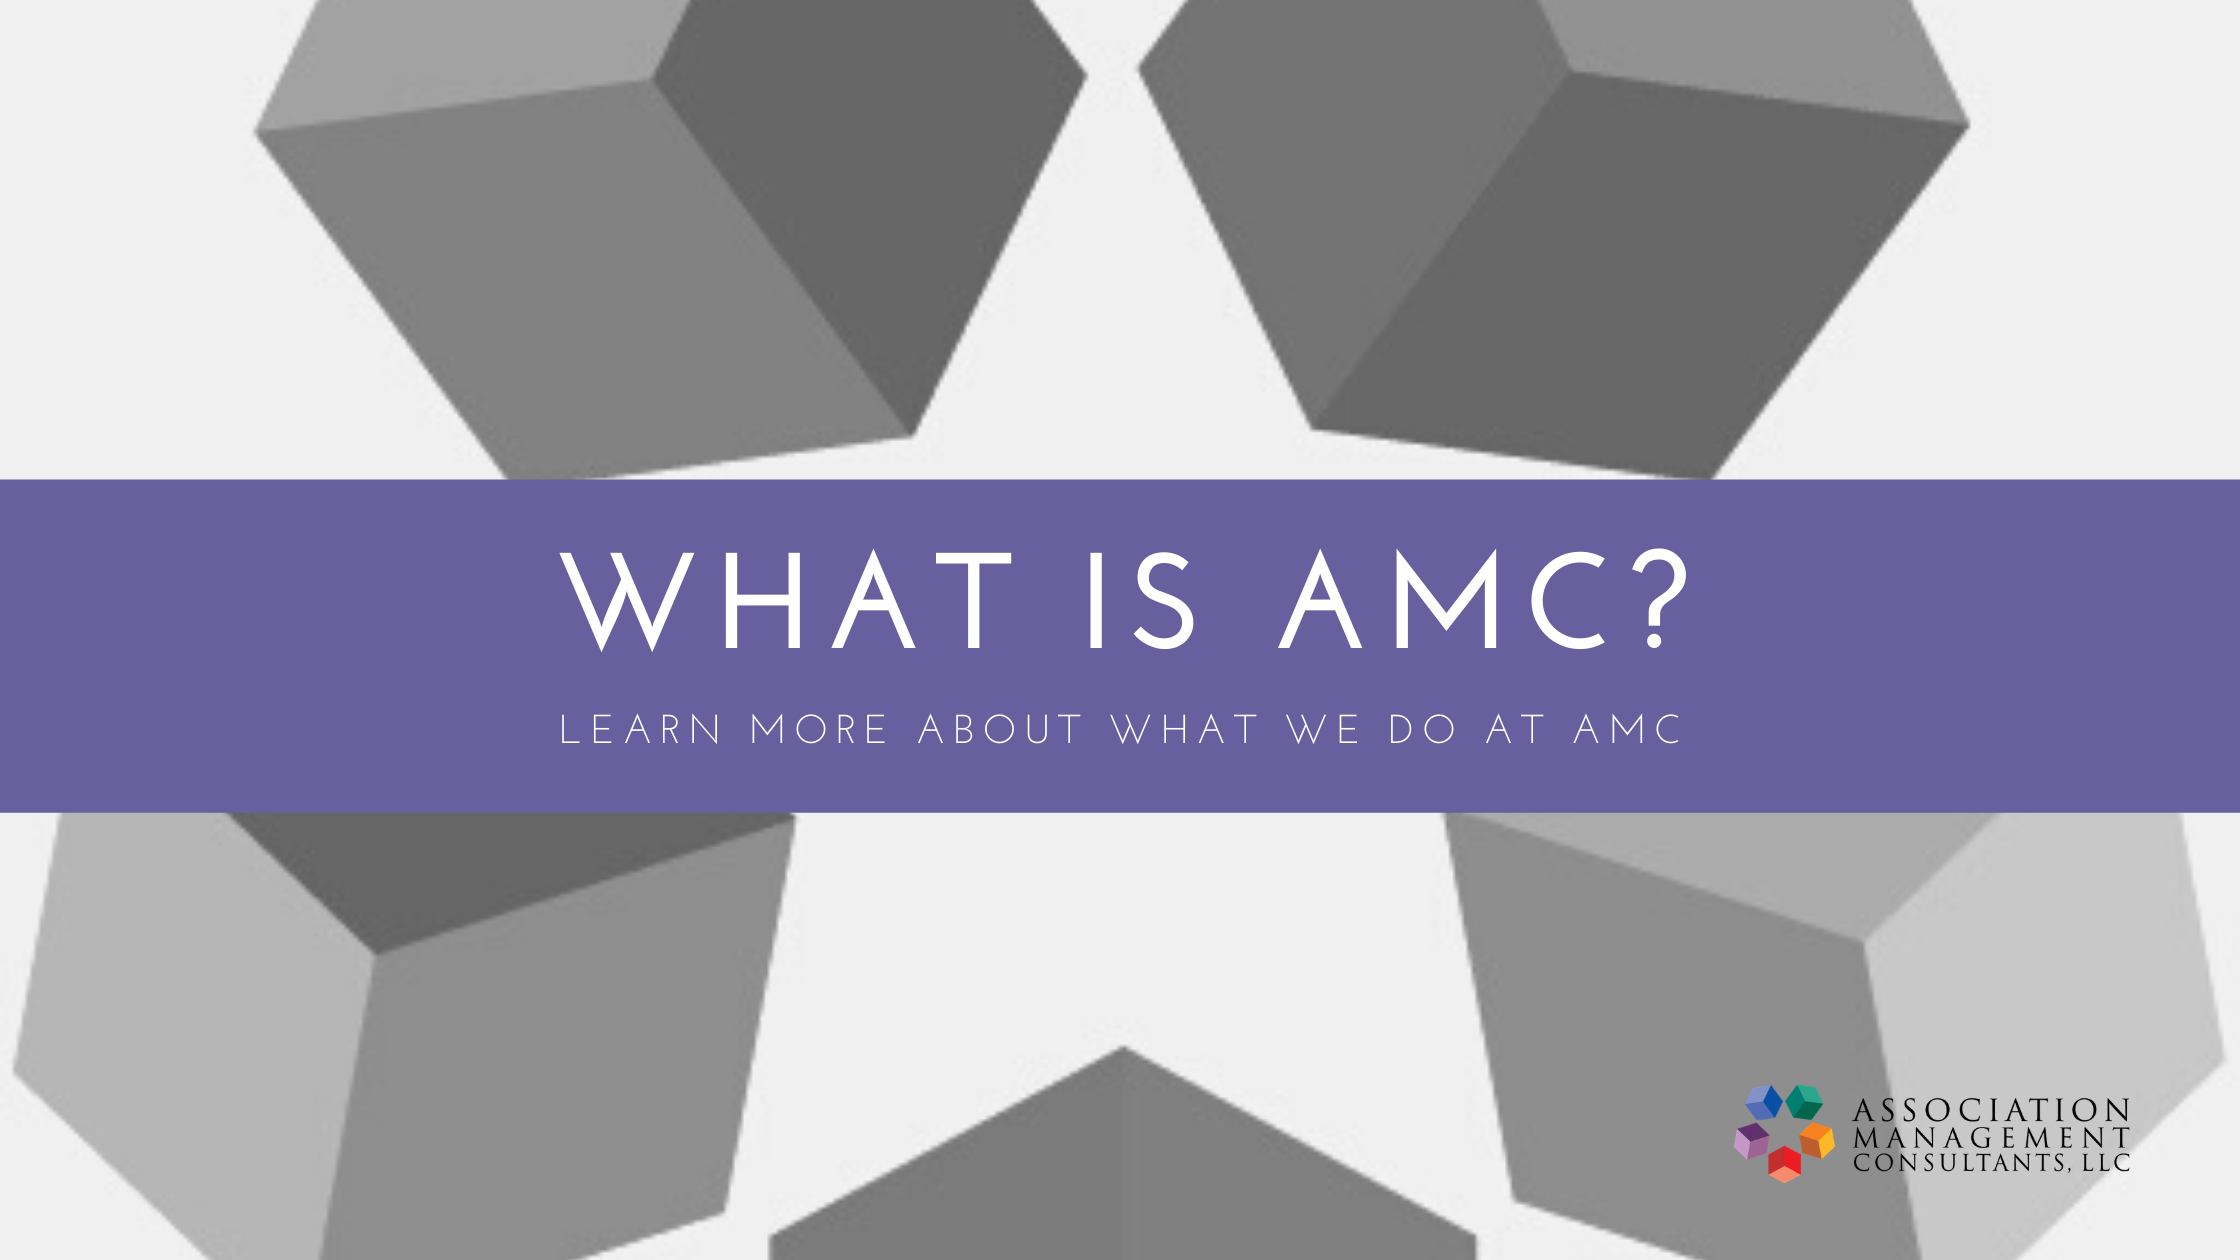 What is AMC?